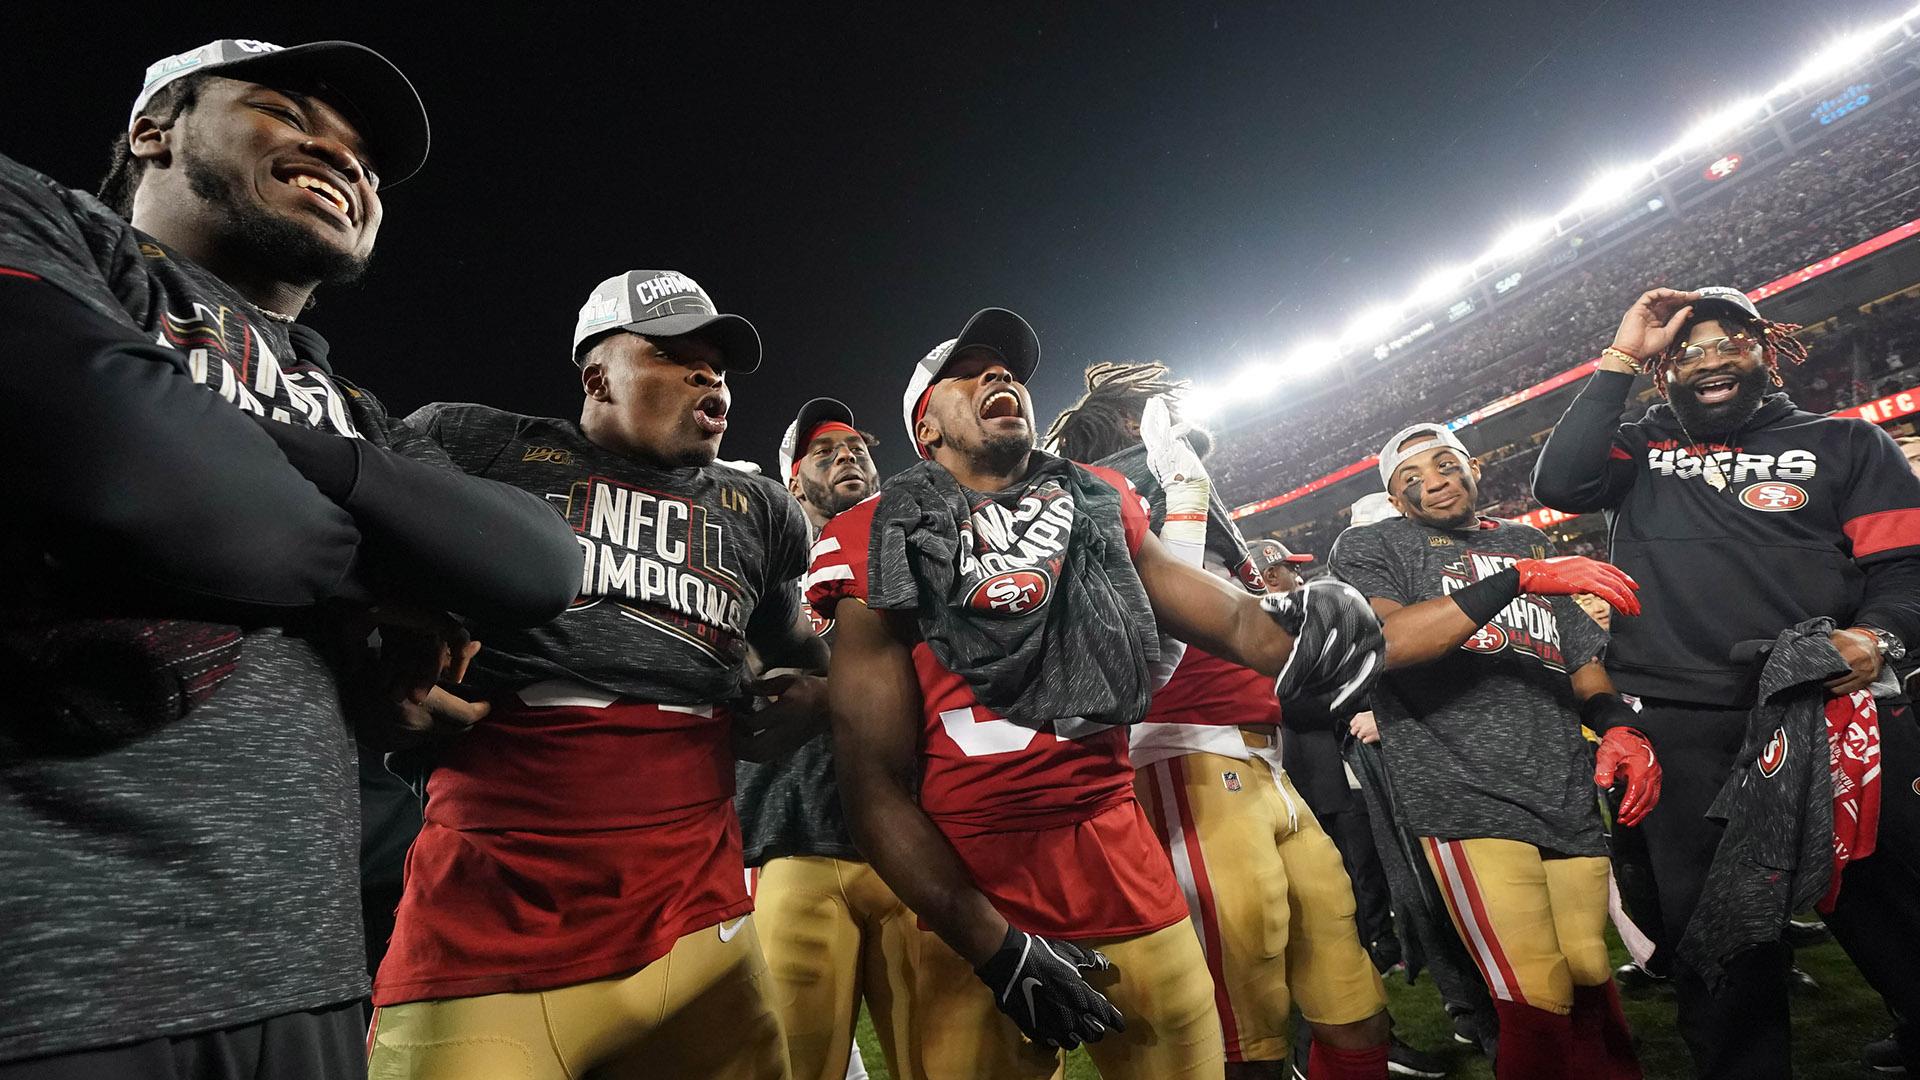 Watch 49ers' wild celebration after clinching Super Bowl 54